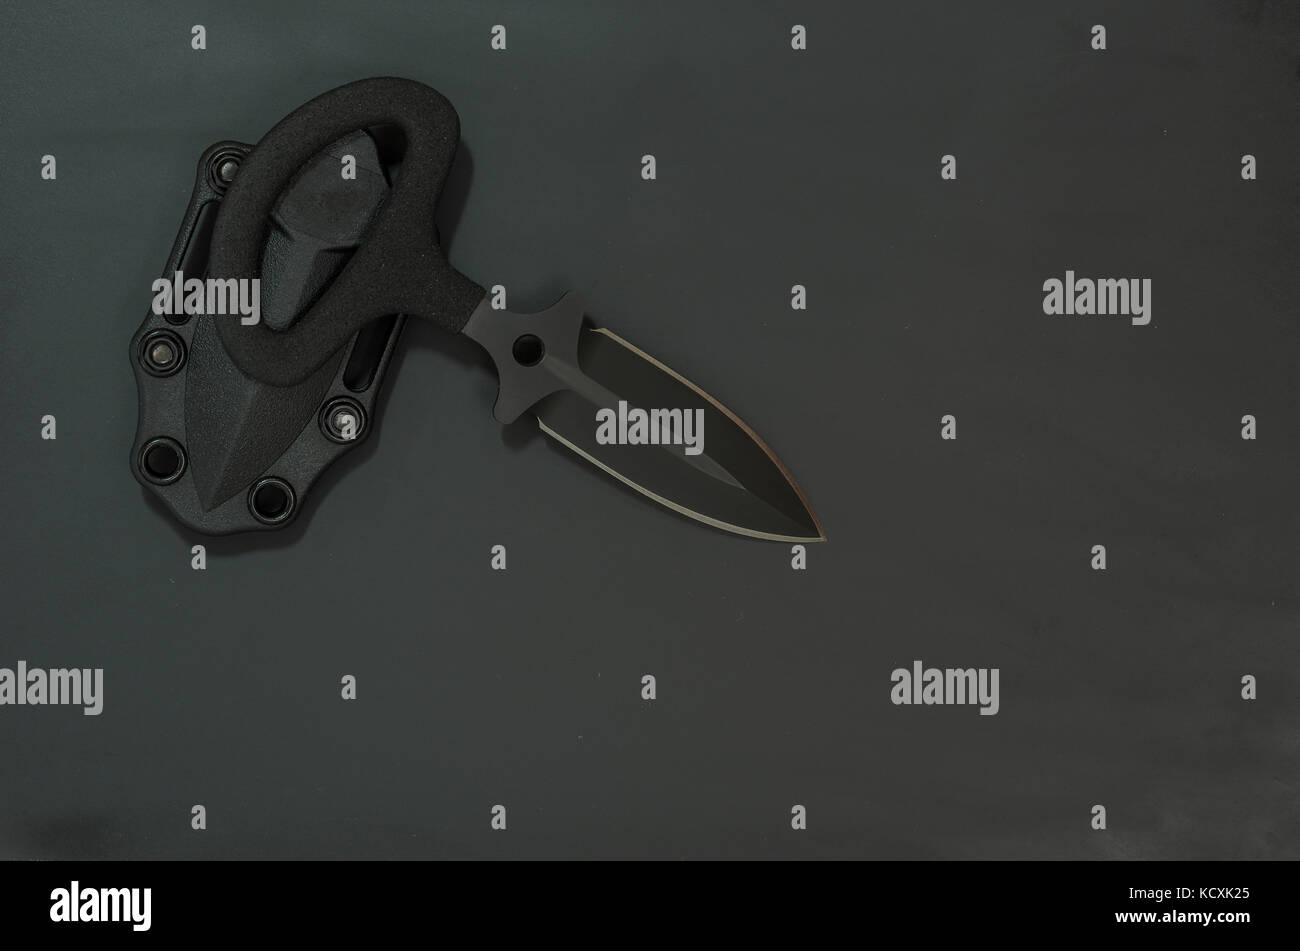 Military black knife on a black background. Diagonal composition. Flat lay. Stock Photo